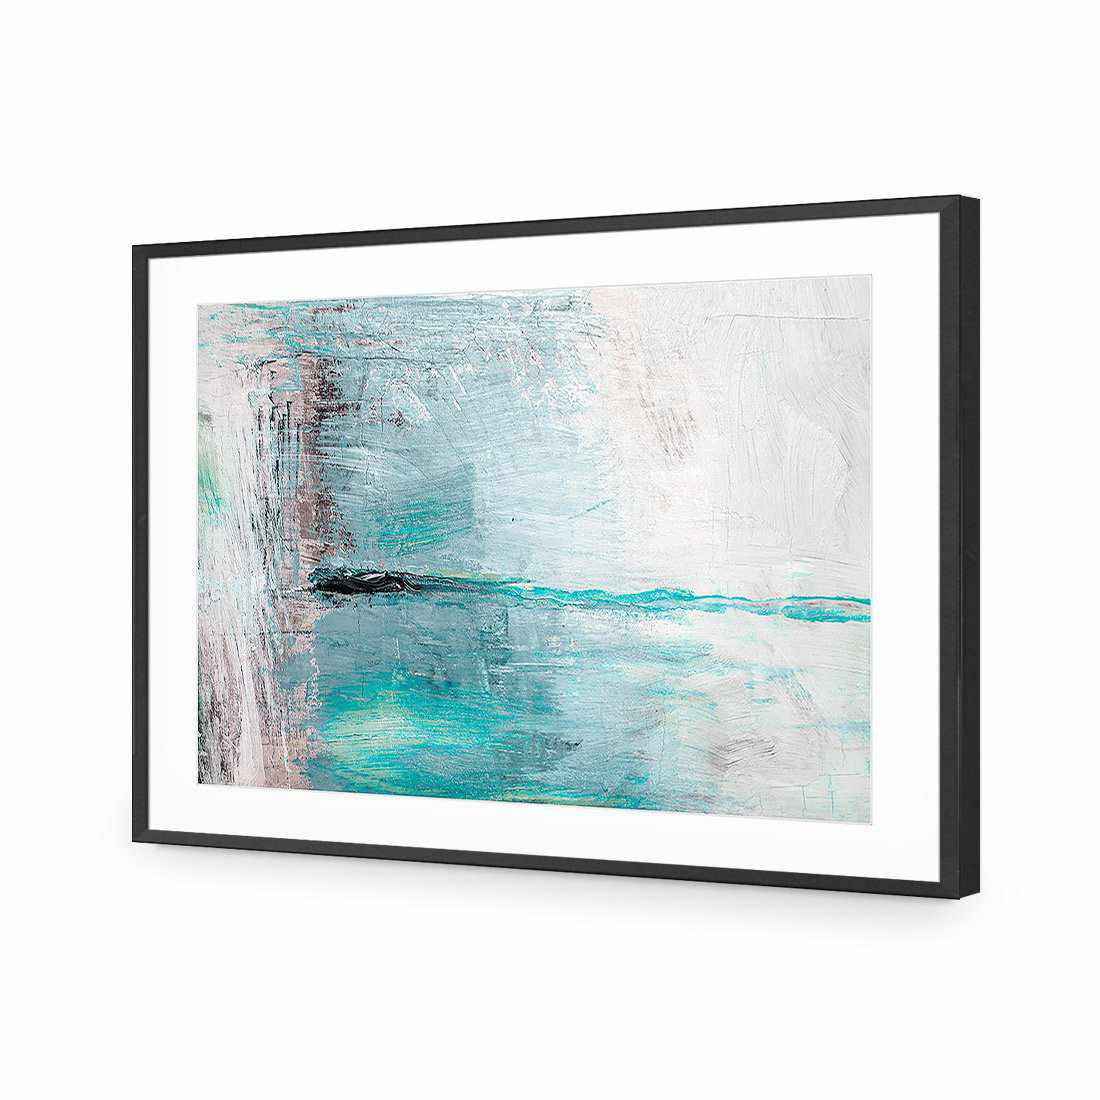 Painting The Sky-Acrylic-Wall Art Design-With Border-Acrylic - Black Frame-45x30cm-Wall Art Designs